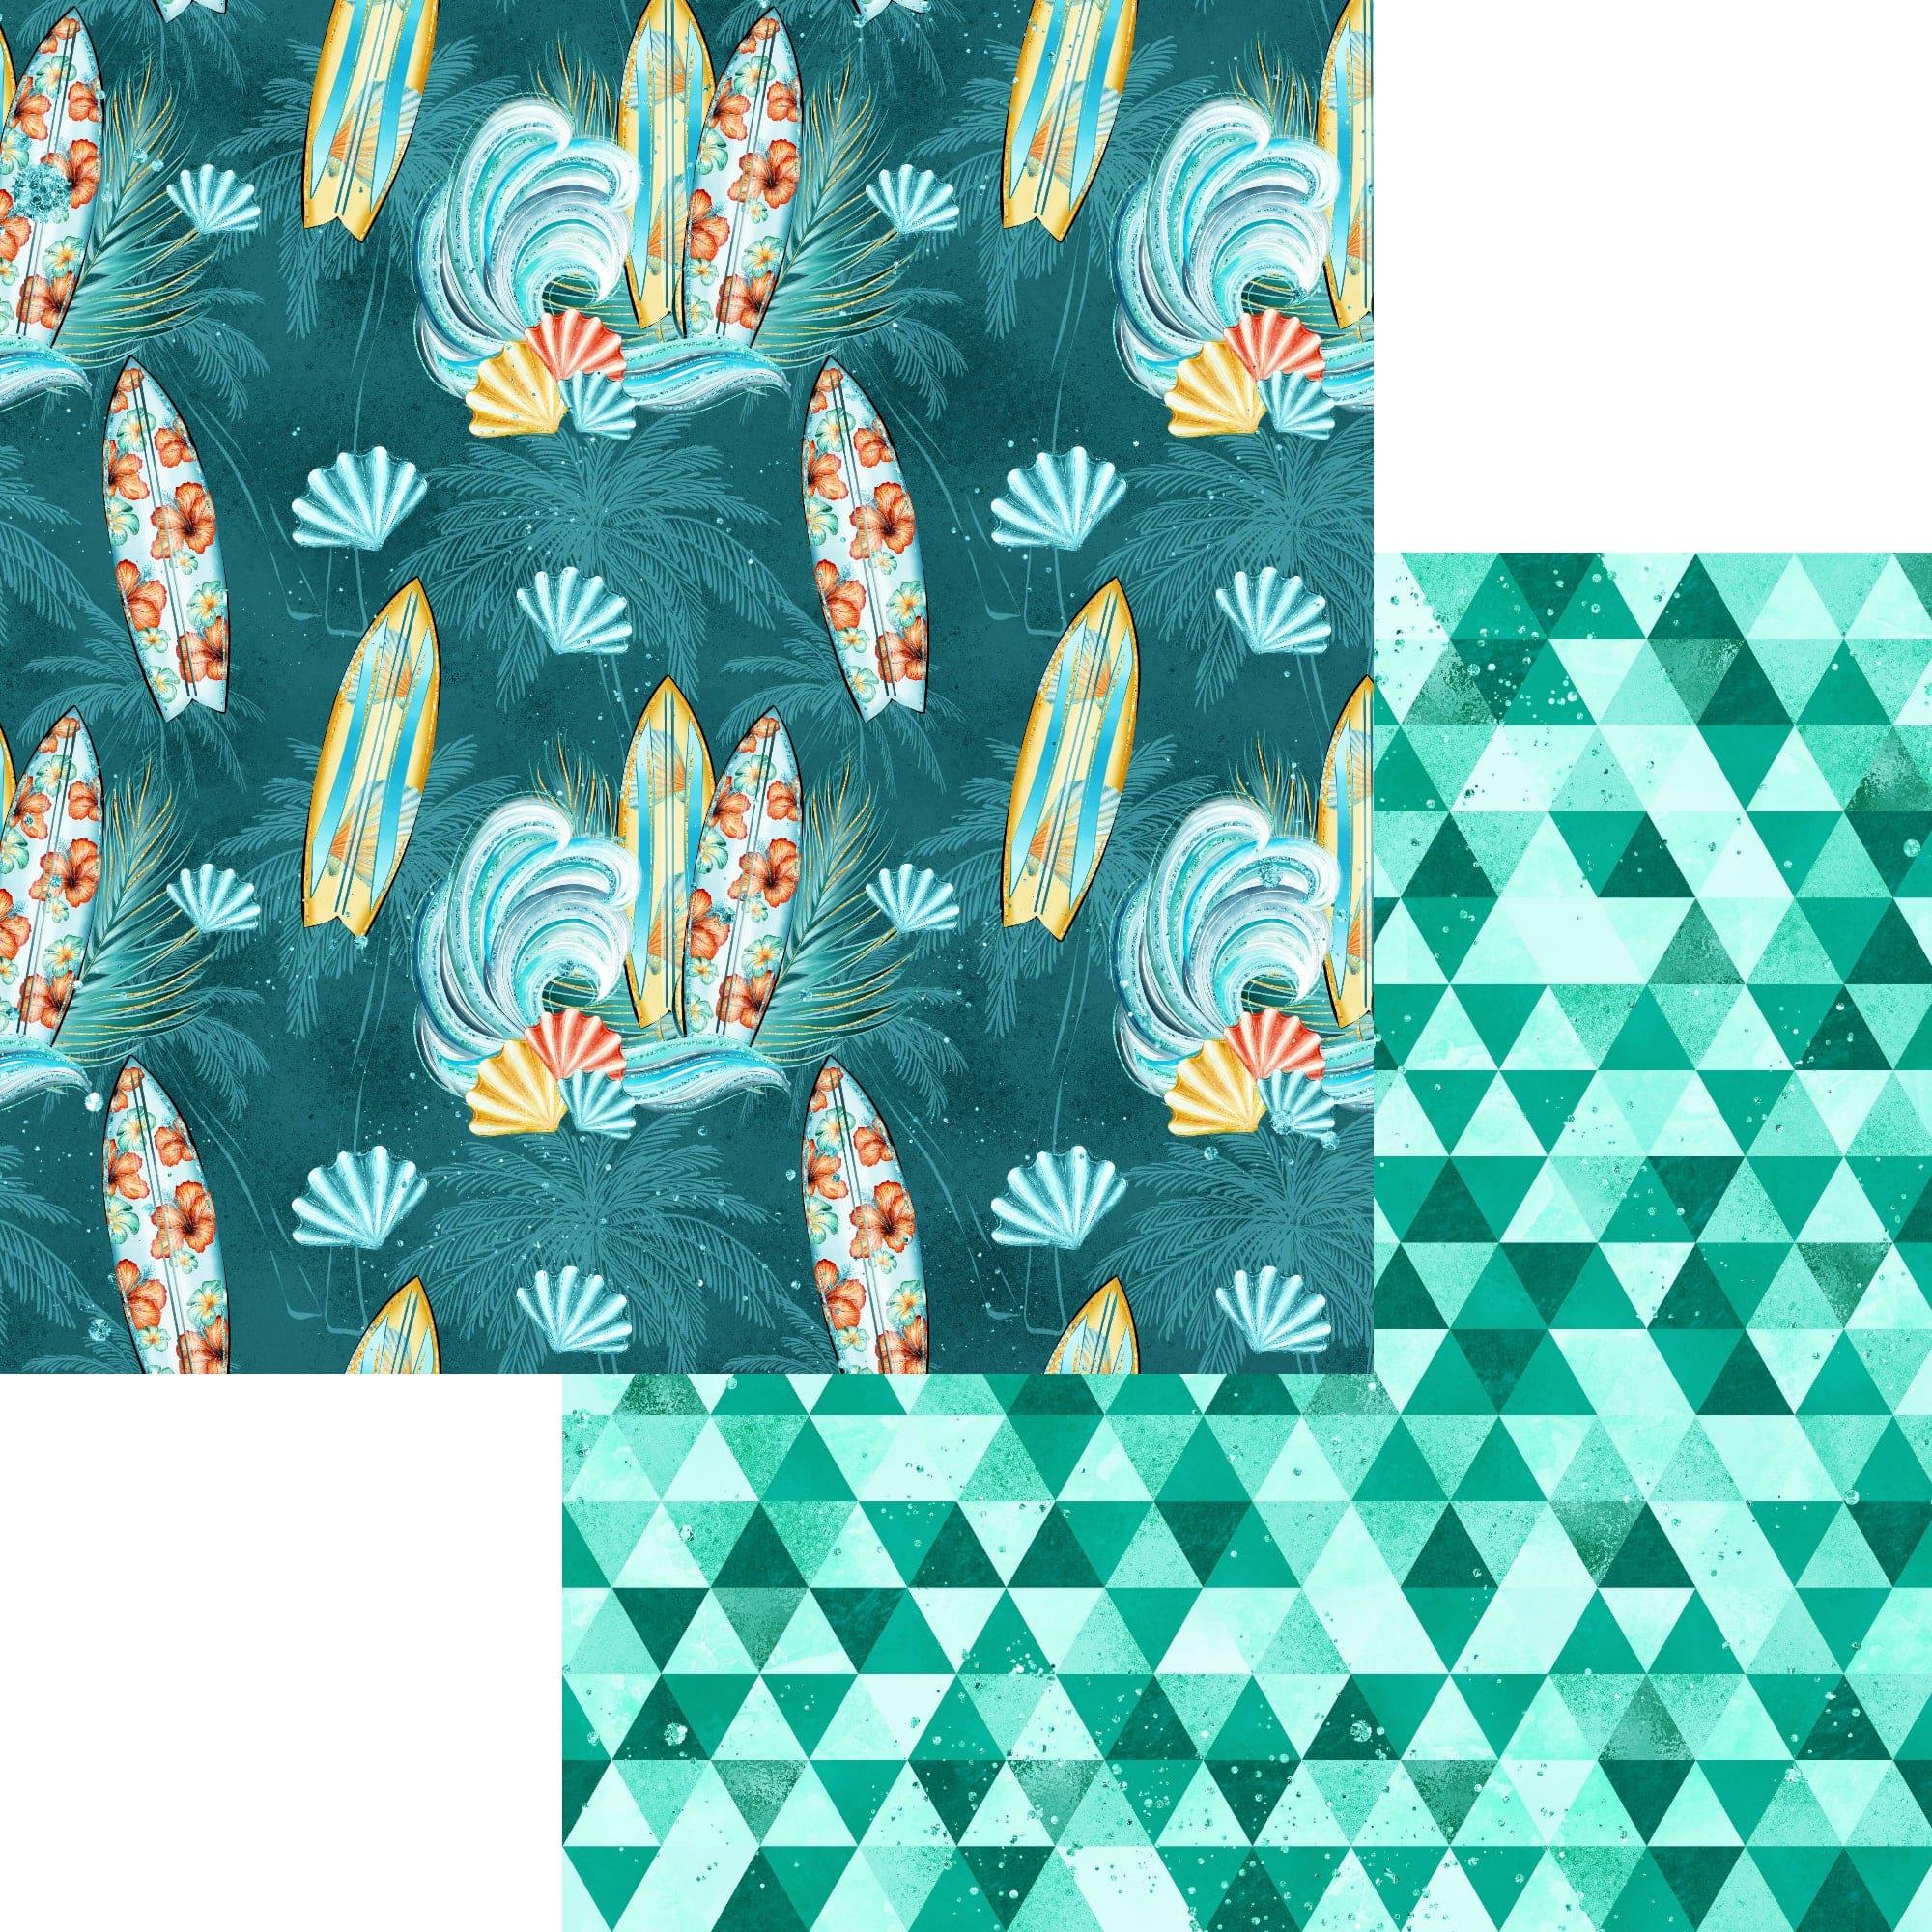  Tropics Collection Surfer 12 x 12 Double-Sided Scrapbook Paper by SSC Designs - Scrapbook Supply Companies